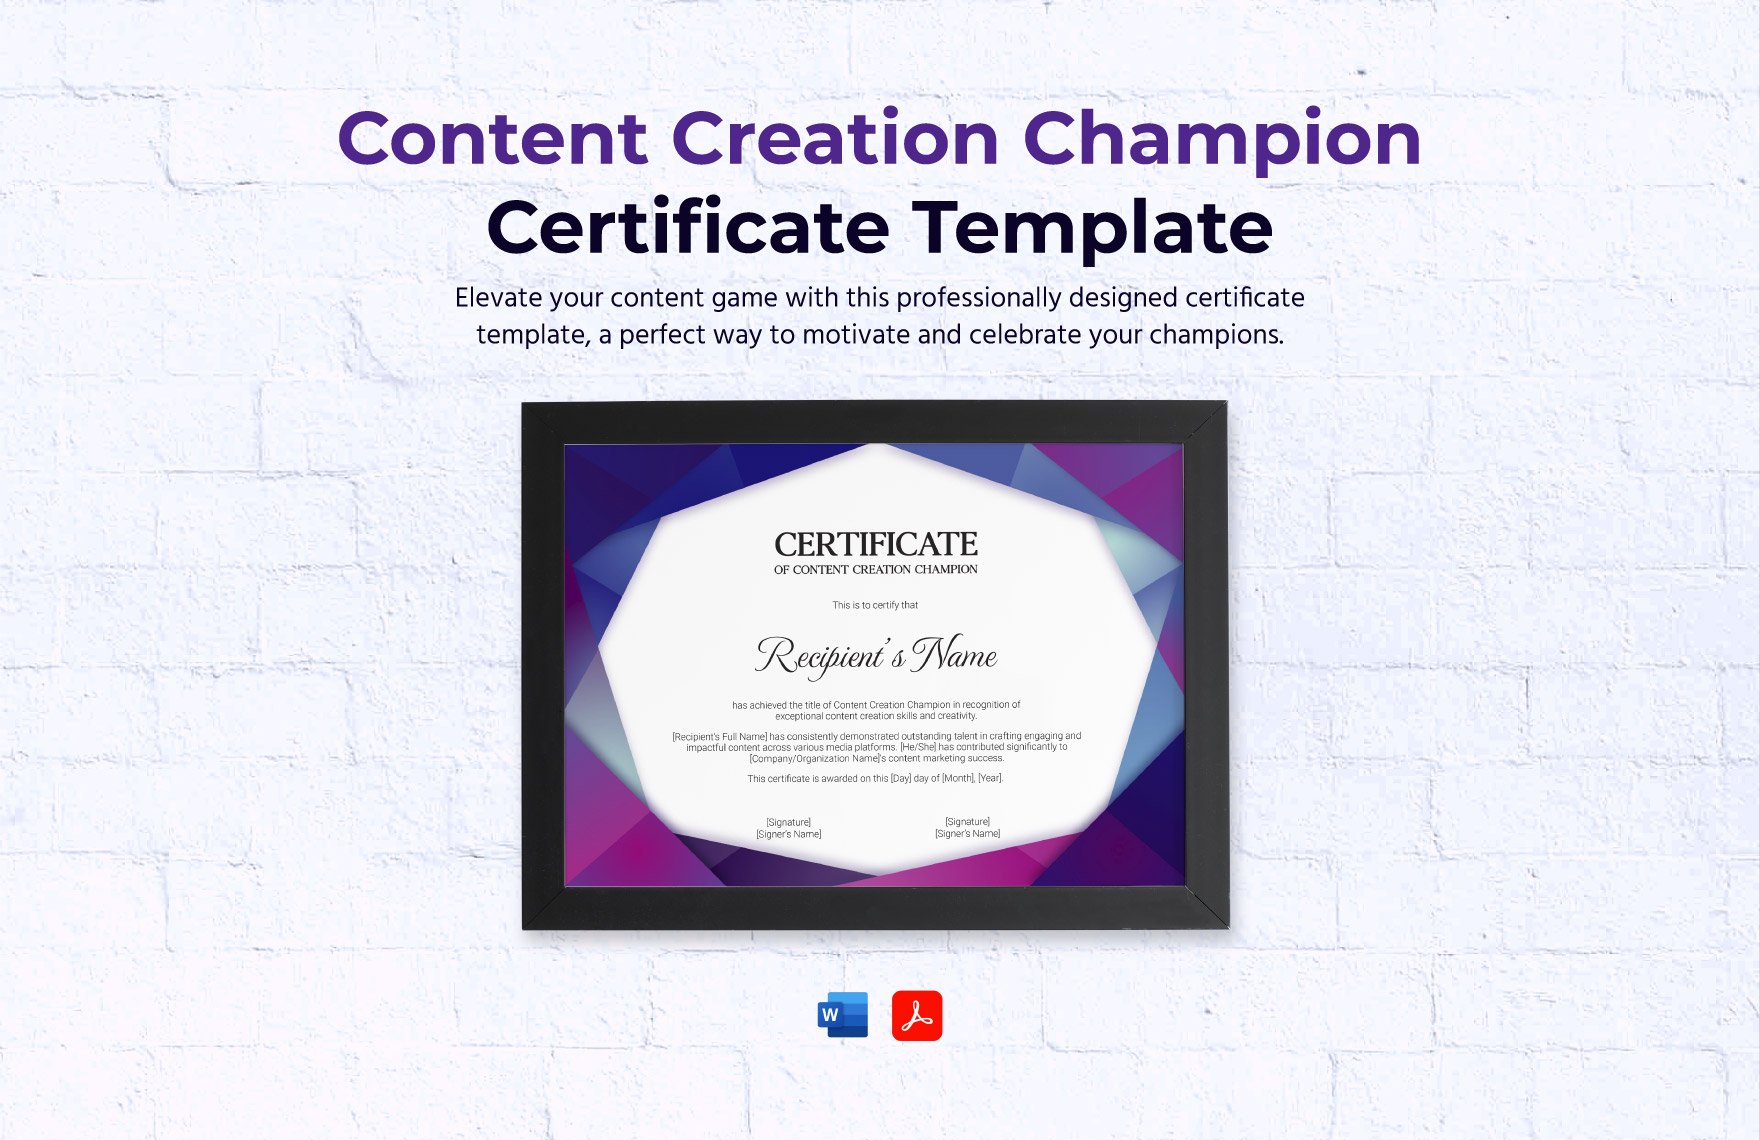 Content Creation Champion Certificate Template in Word, PDF